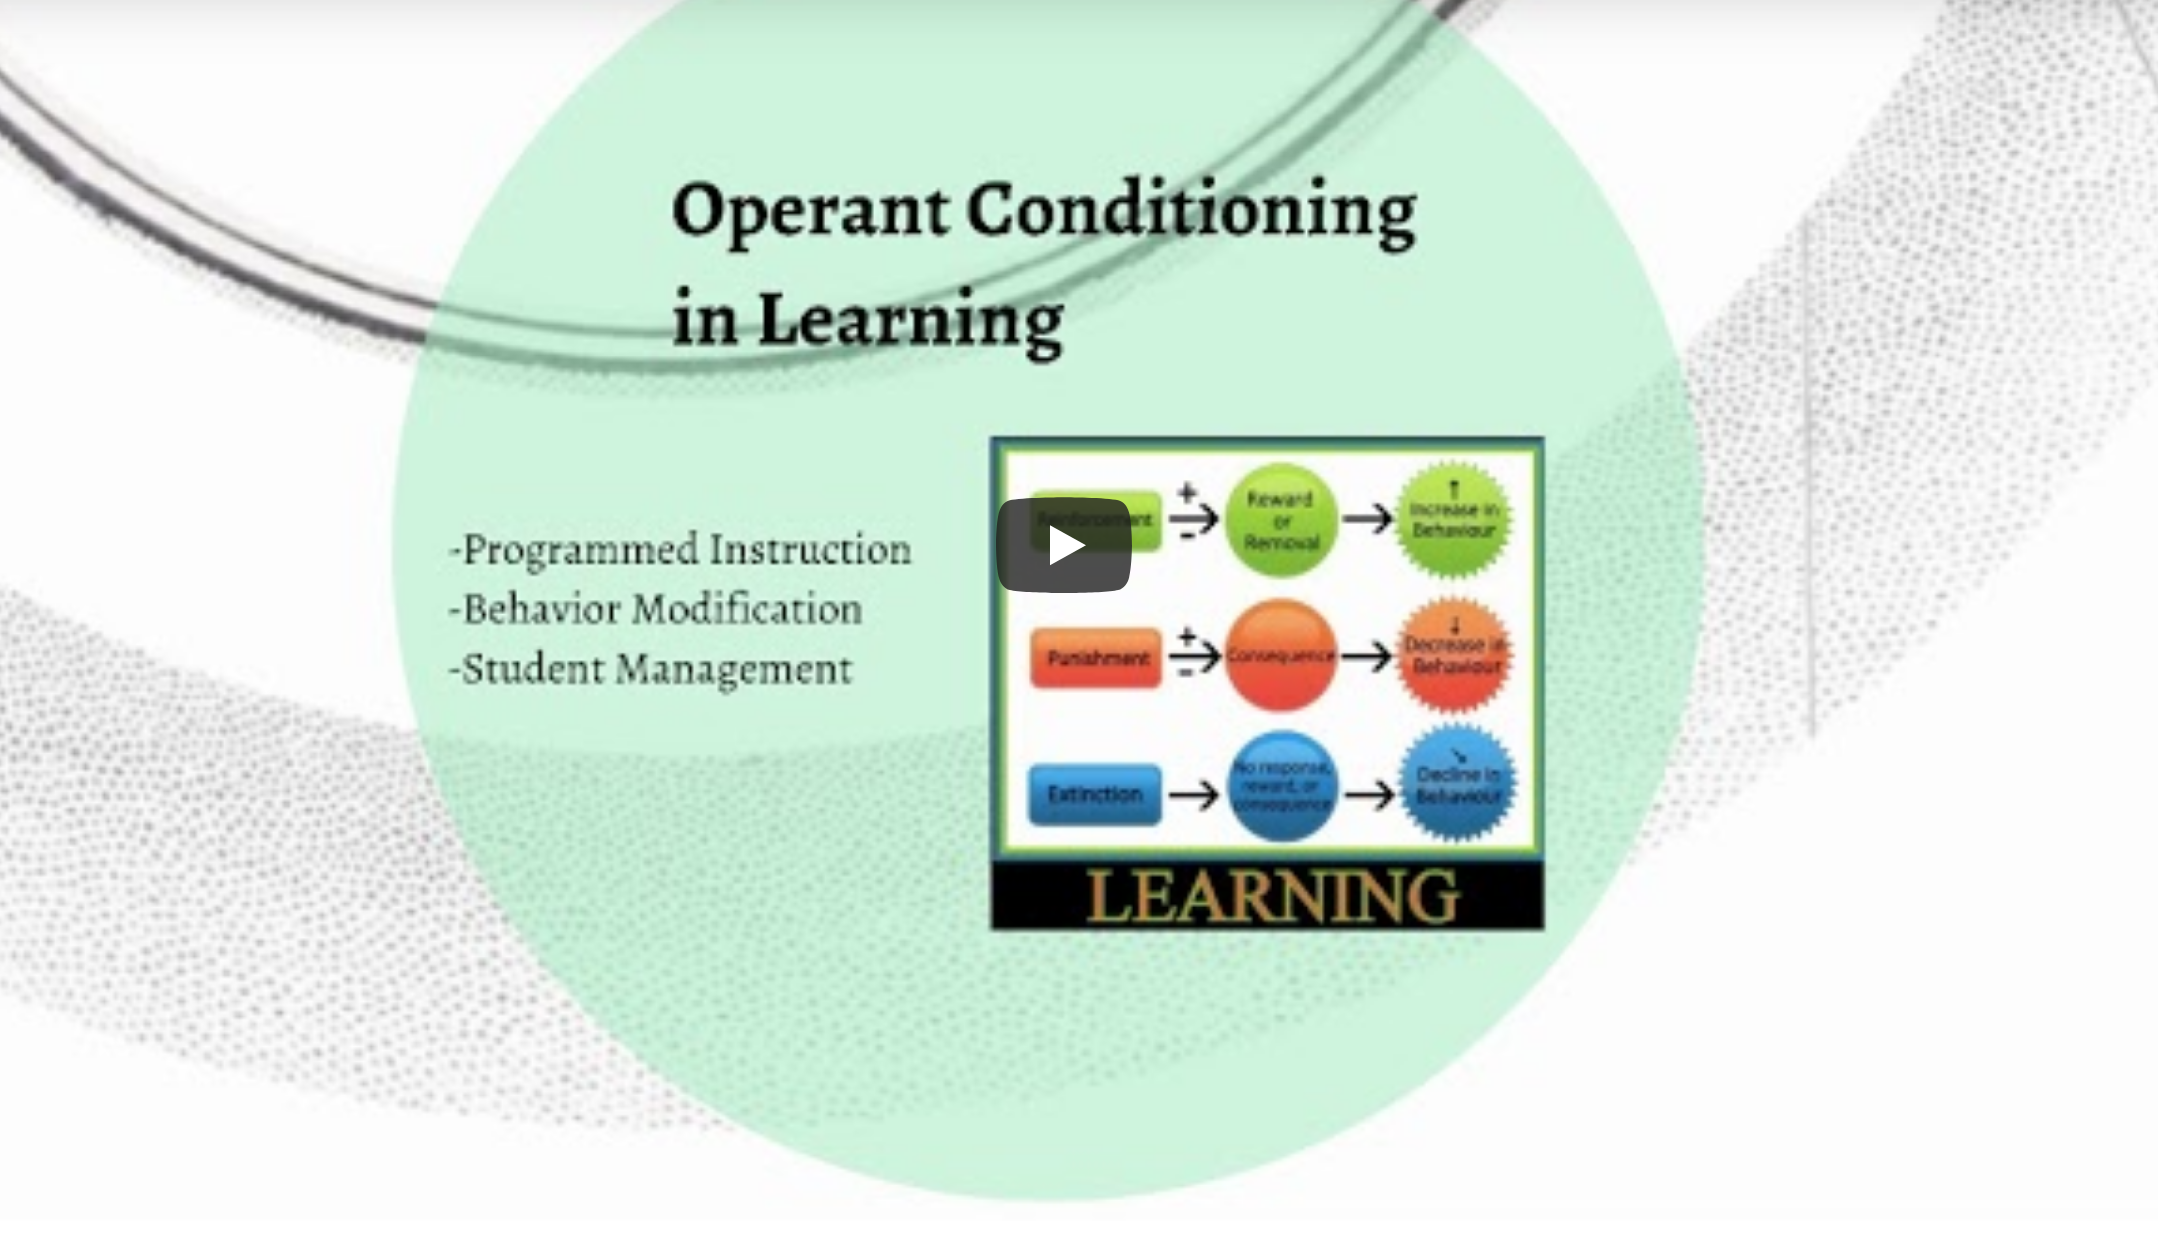 Instructional Design Models and Theories: Operant Conditioning Theory